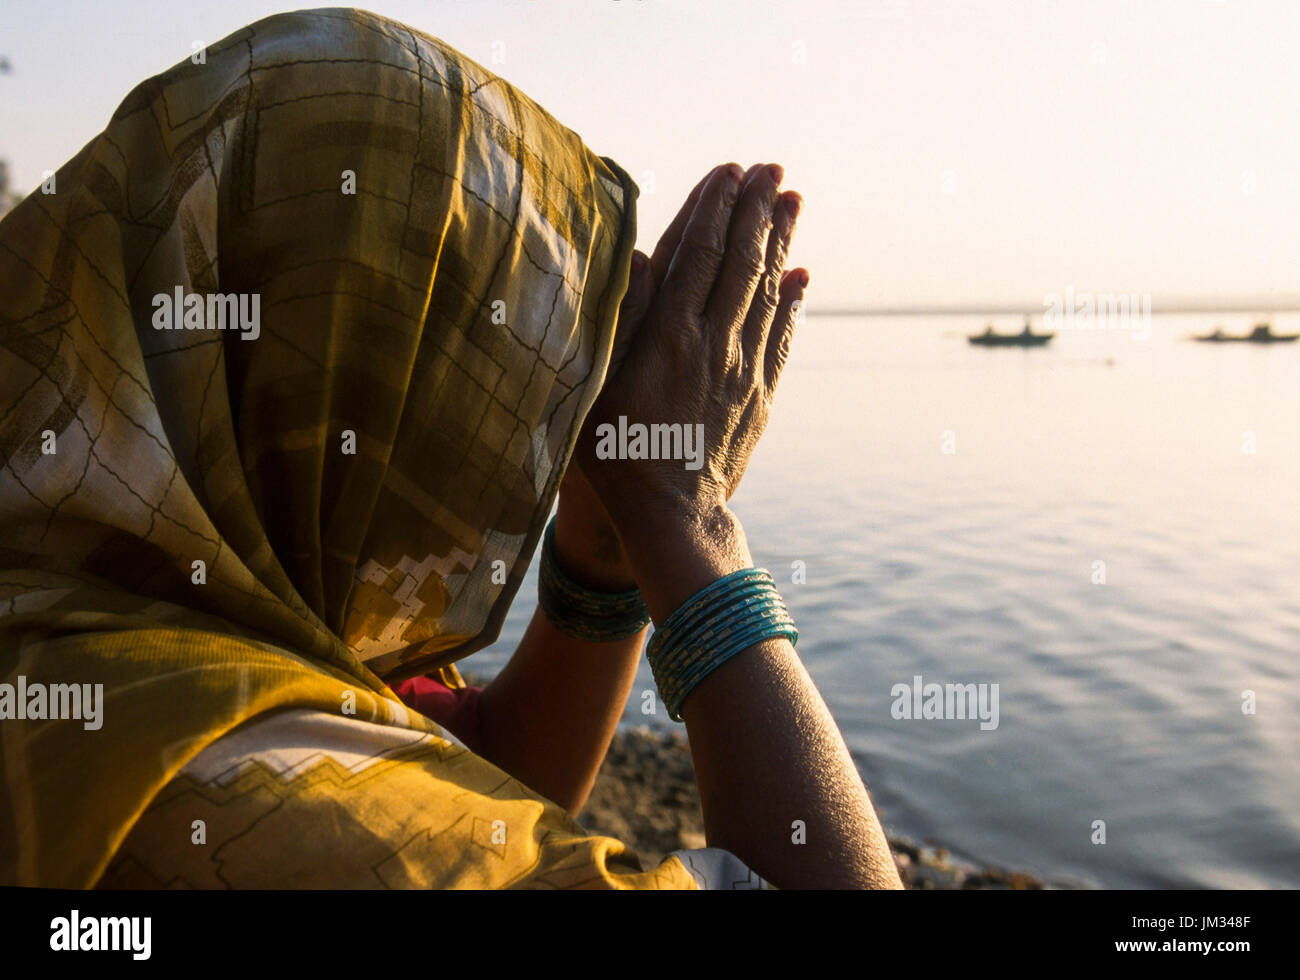 INDIA, Uttar Pradesh, Varanasi, Hindu woman folding hand for morning prayer for Lord shiva and goddess ganga at river Ganges, facing the sunrise, the old Banaras or Kashi or ANANDAVANA ( forest of bliss ) is a sacred place for Hindus to achieve Moksha meaning salvation from eternal circle of rebirth, the Ganga river is a crossing place from earth to heaven, a very religious place for enlightenment bliss devotion purification Stock Photo